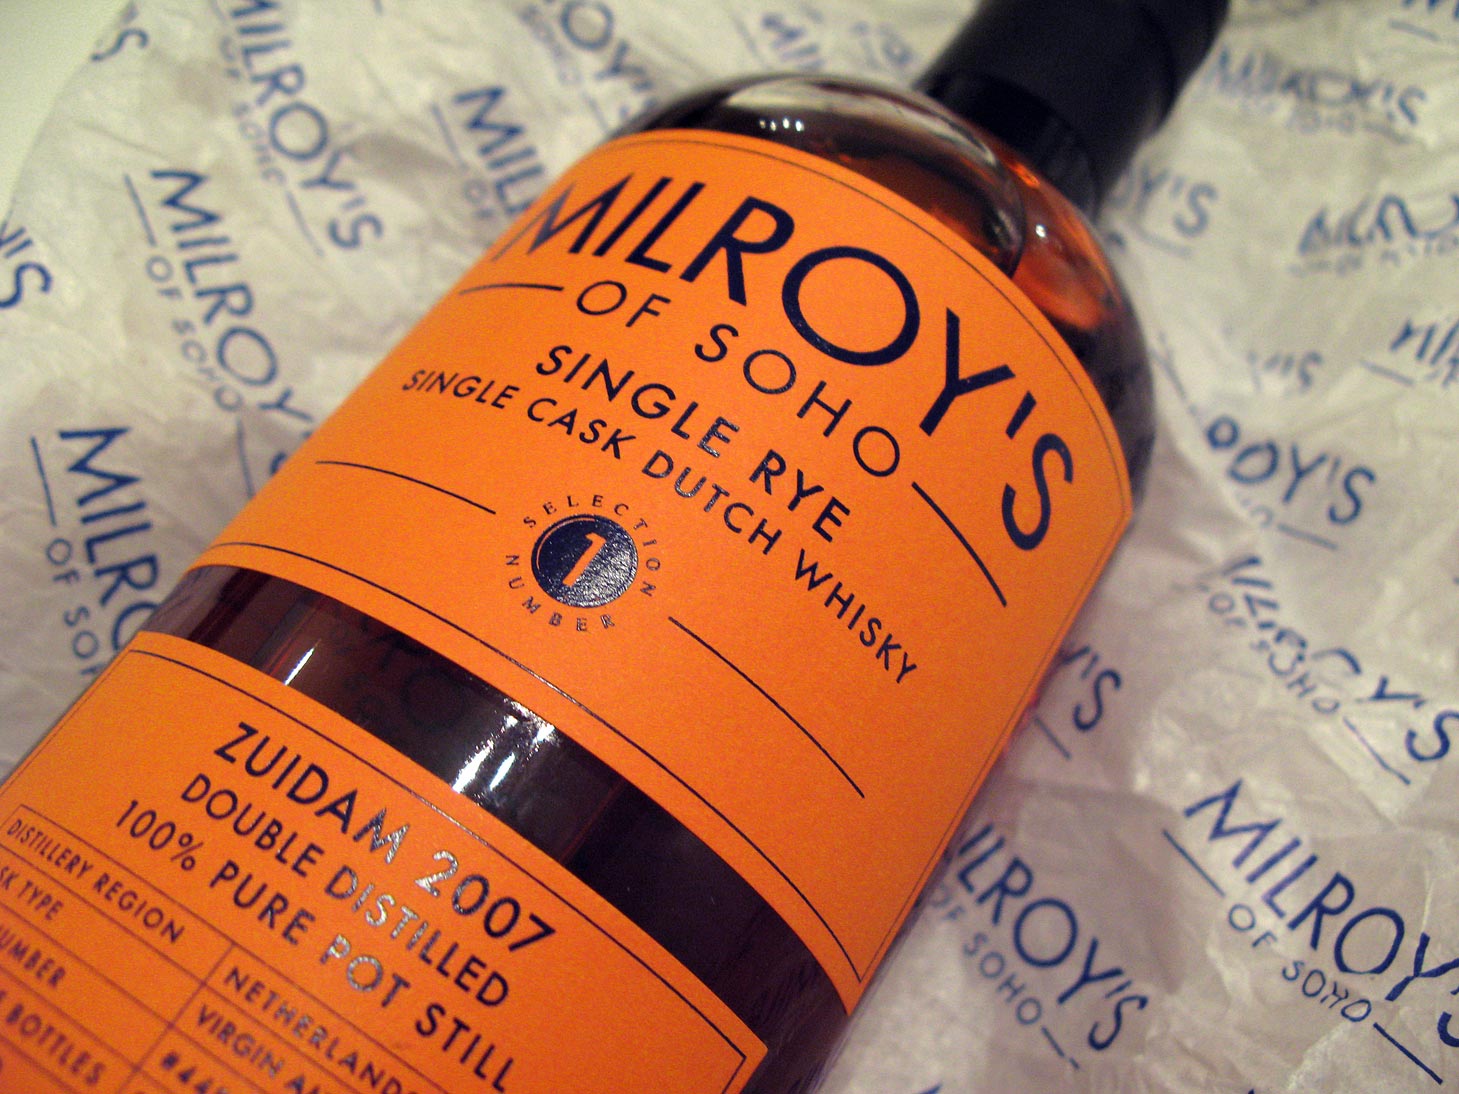 Milroy's simple, but striking label is a drinks cabinet winner. Mandarin and Imperial Blue. Winner